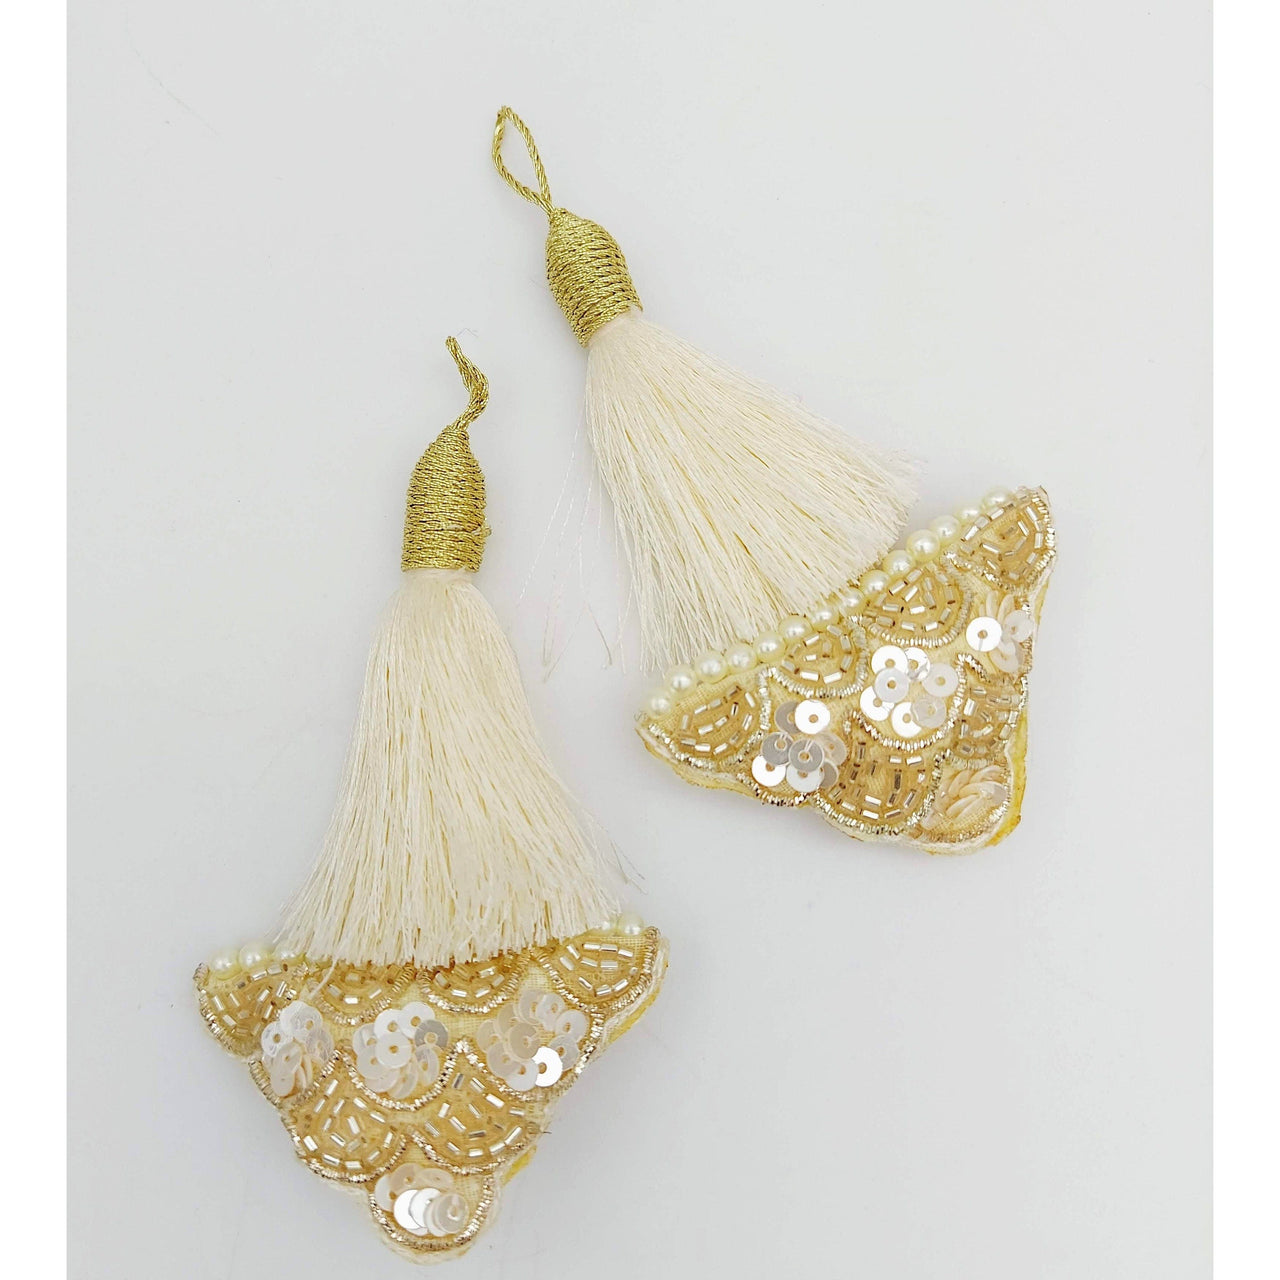 Off White Tassels In Gold  and White Bead and Sequins, Indian Latkans, Blouse Latkan